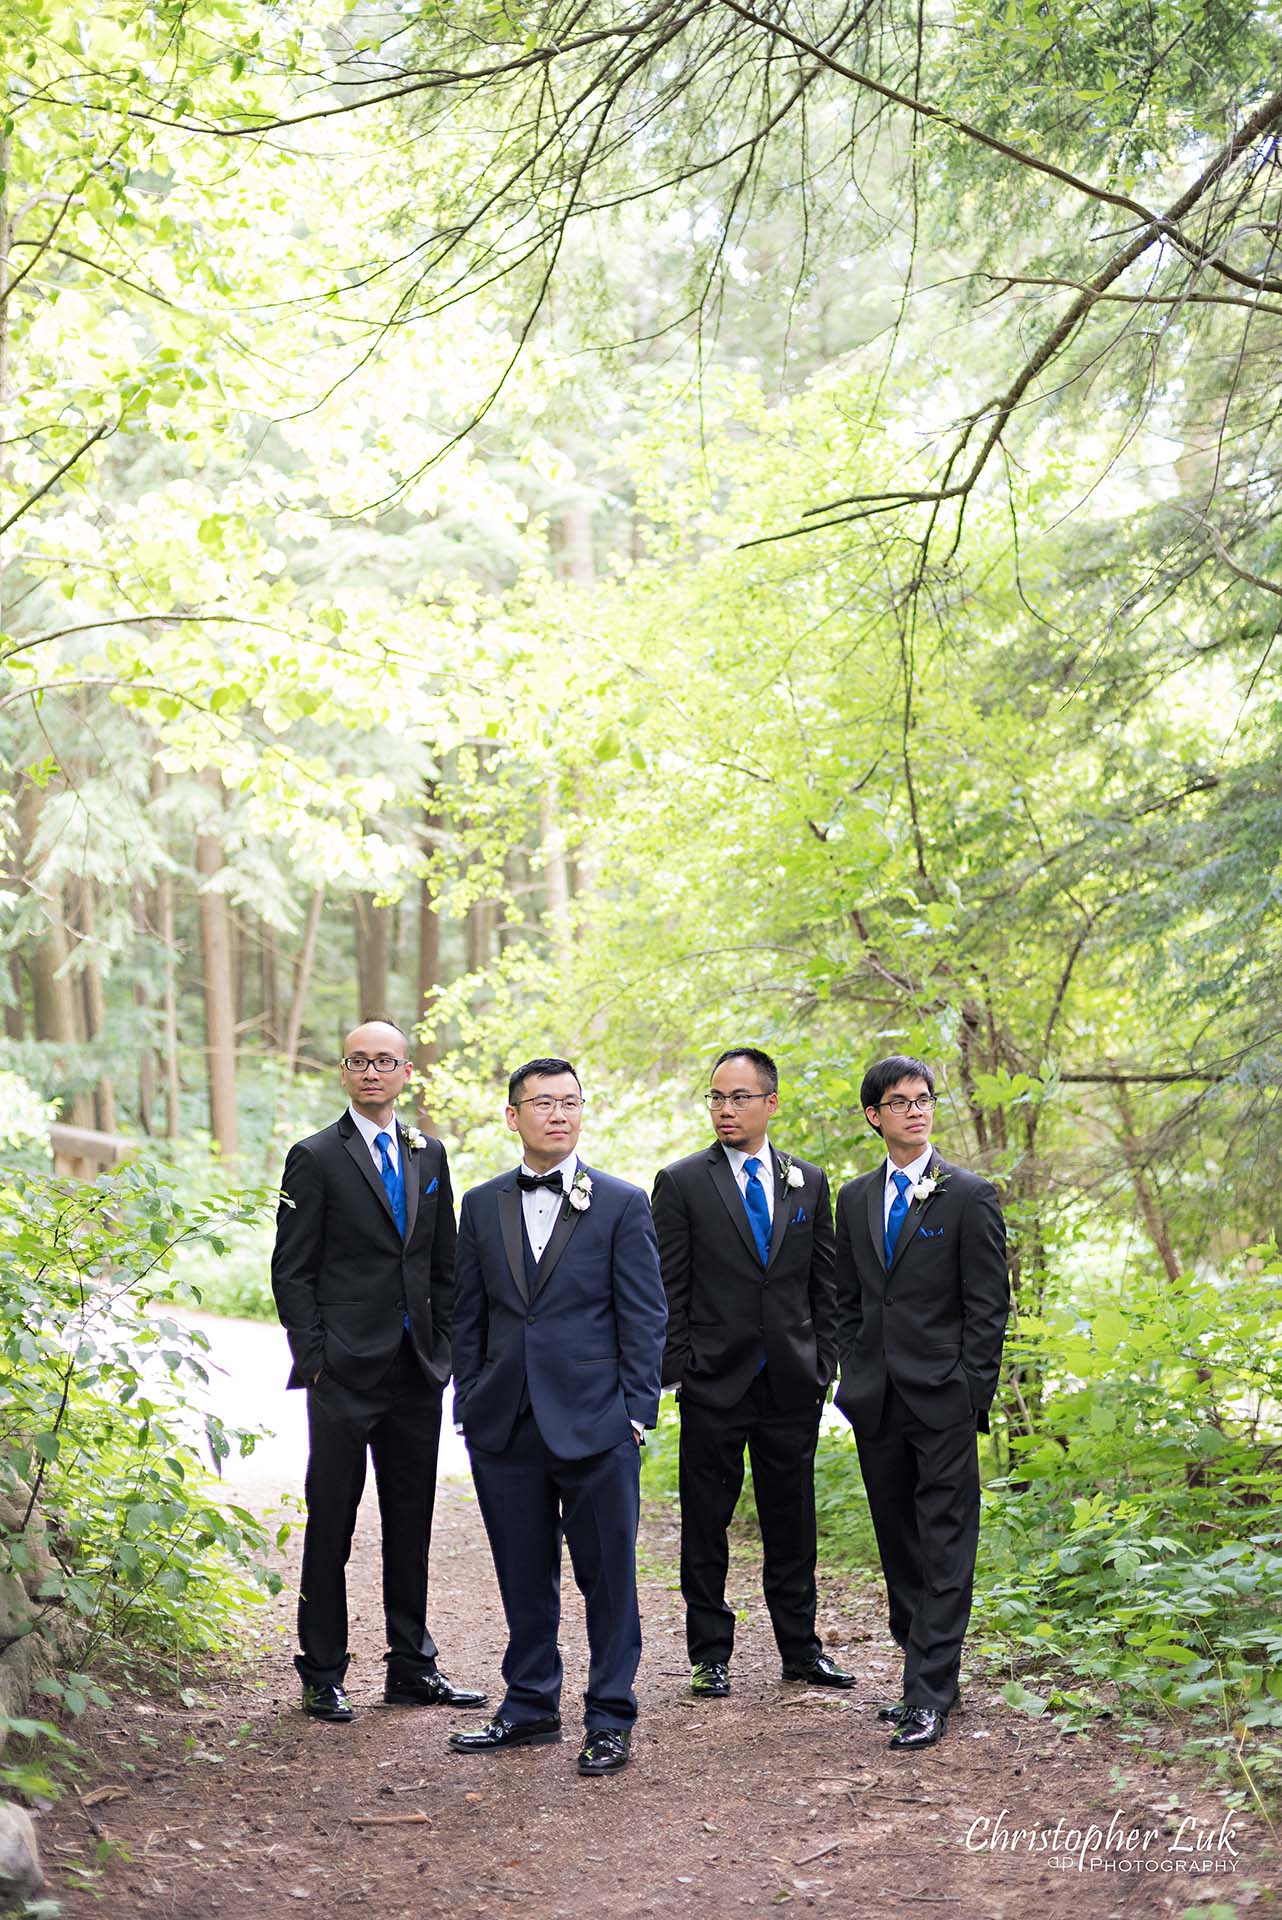 Christopher Luk Toronto Christian Community Church Kleinburg McMichael Art Gallery Presidente Banquet Hall Vaughan Wedding Photographer Groom Best Man Groomsmen Natural Candid Photojournalistic Forest Woods Wooded Area Tall Trees Cool Boy Band Album Cover 